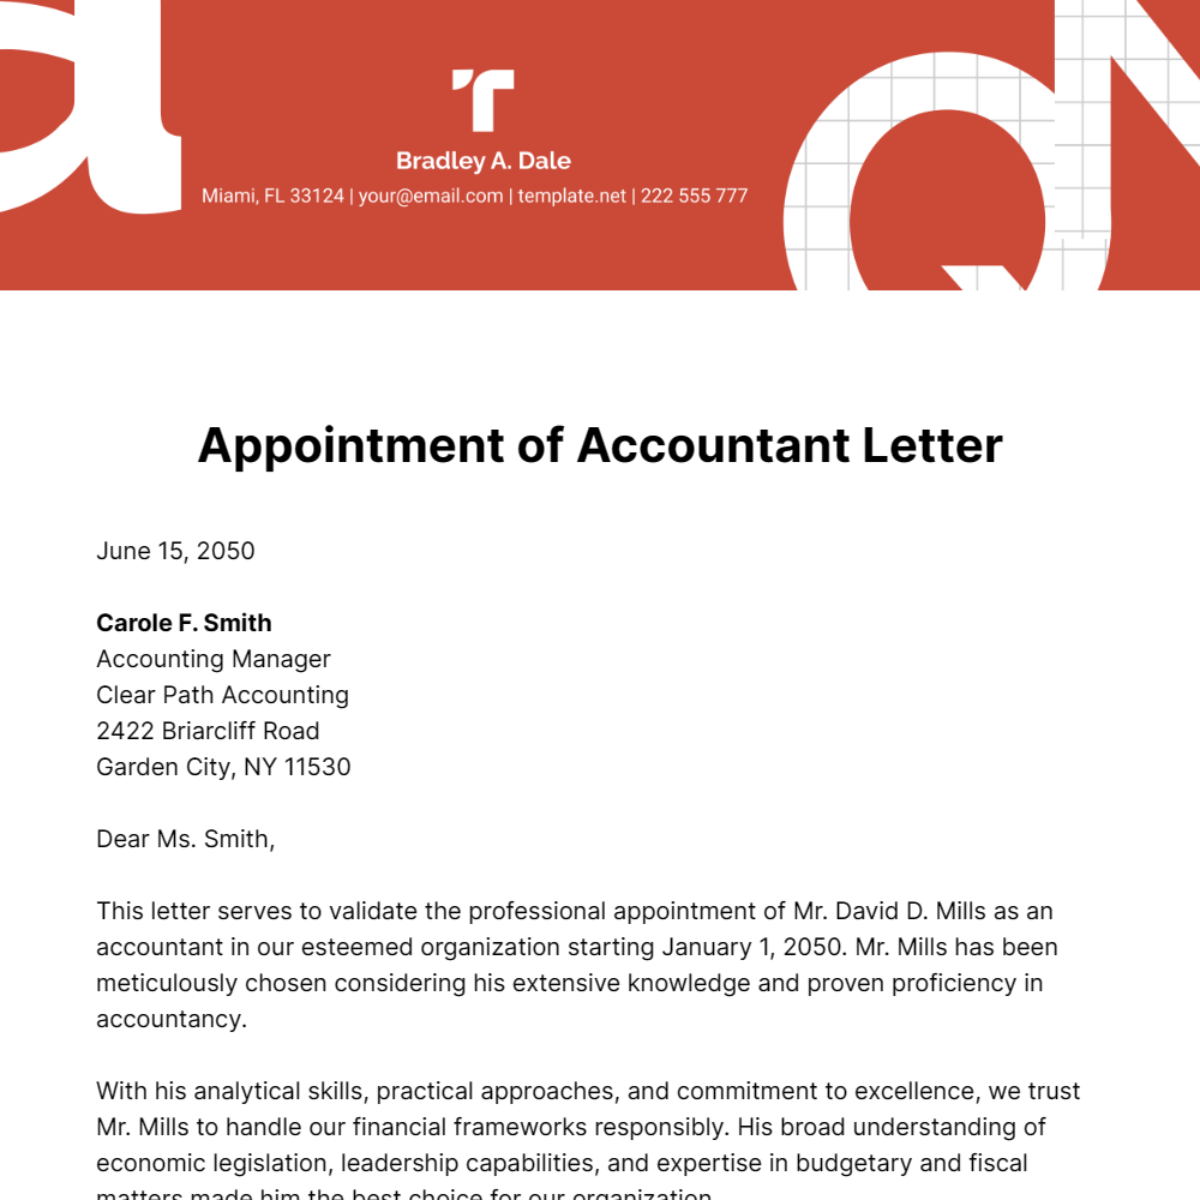 Appointment of Accountant Letter Template